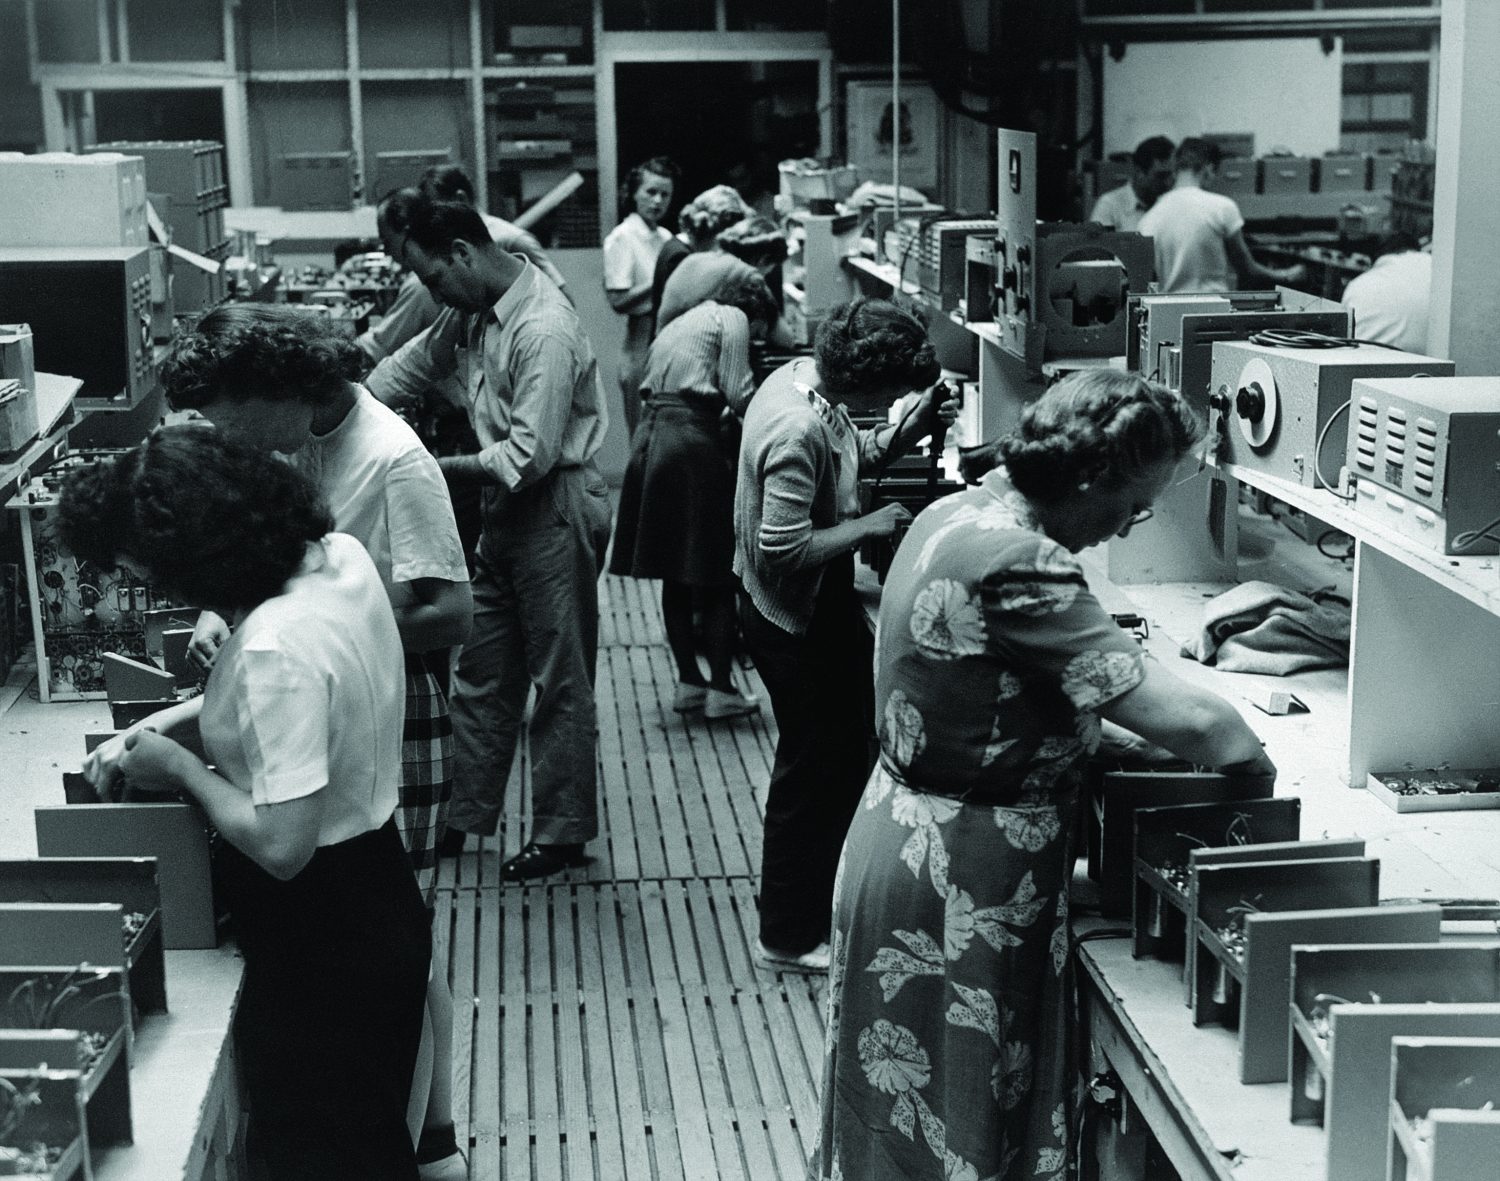 Hewlett-Packard employees working on the pass-on assembly line in 1946.